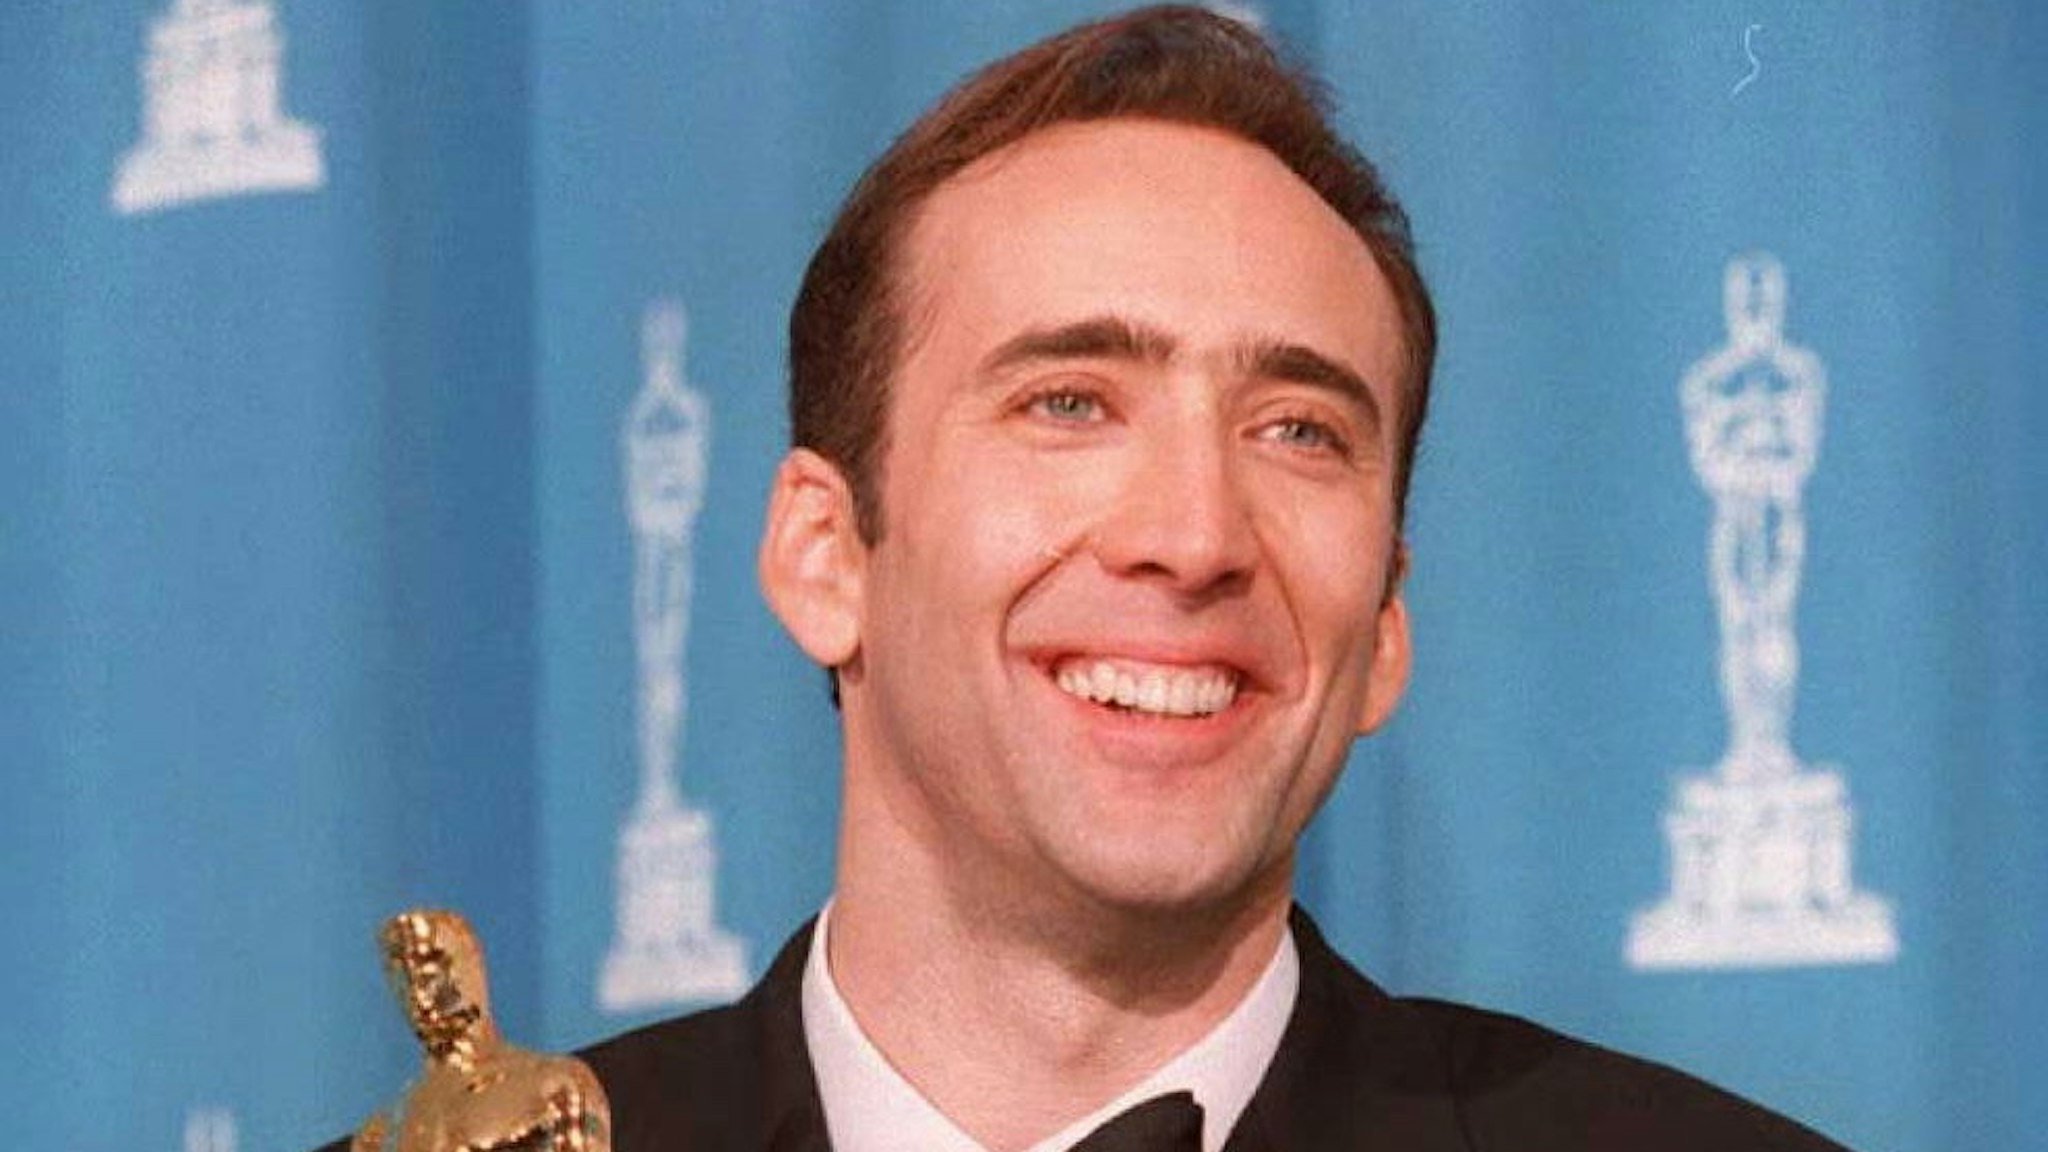 Nicolas Cage, the winner of Best Actor for his role as the self-destructive alcoholic Ben Sanderson in "Leaving Las Vegas," poses with his Oscar at the 68th annual Academy Awards 25 March at the Dorothy Chandler Pavilion in Los Angeles.